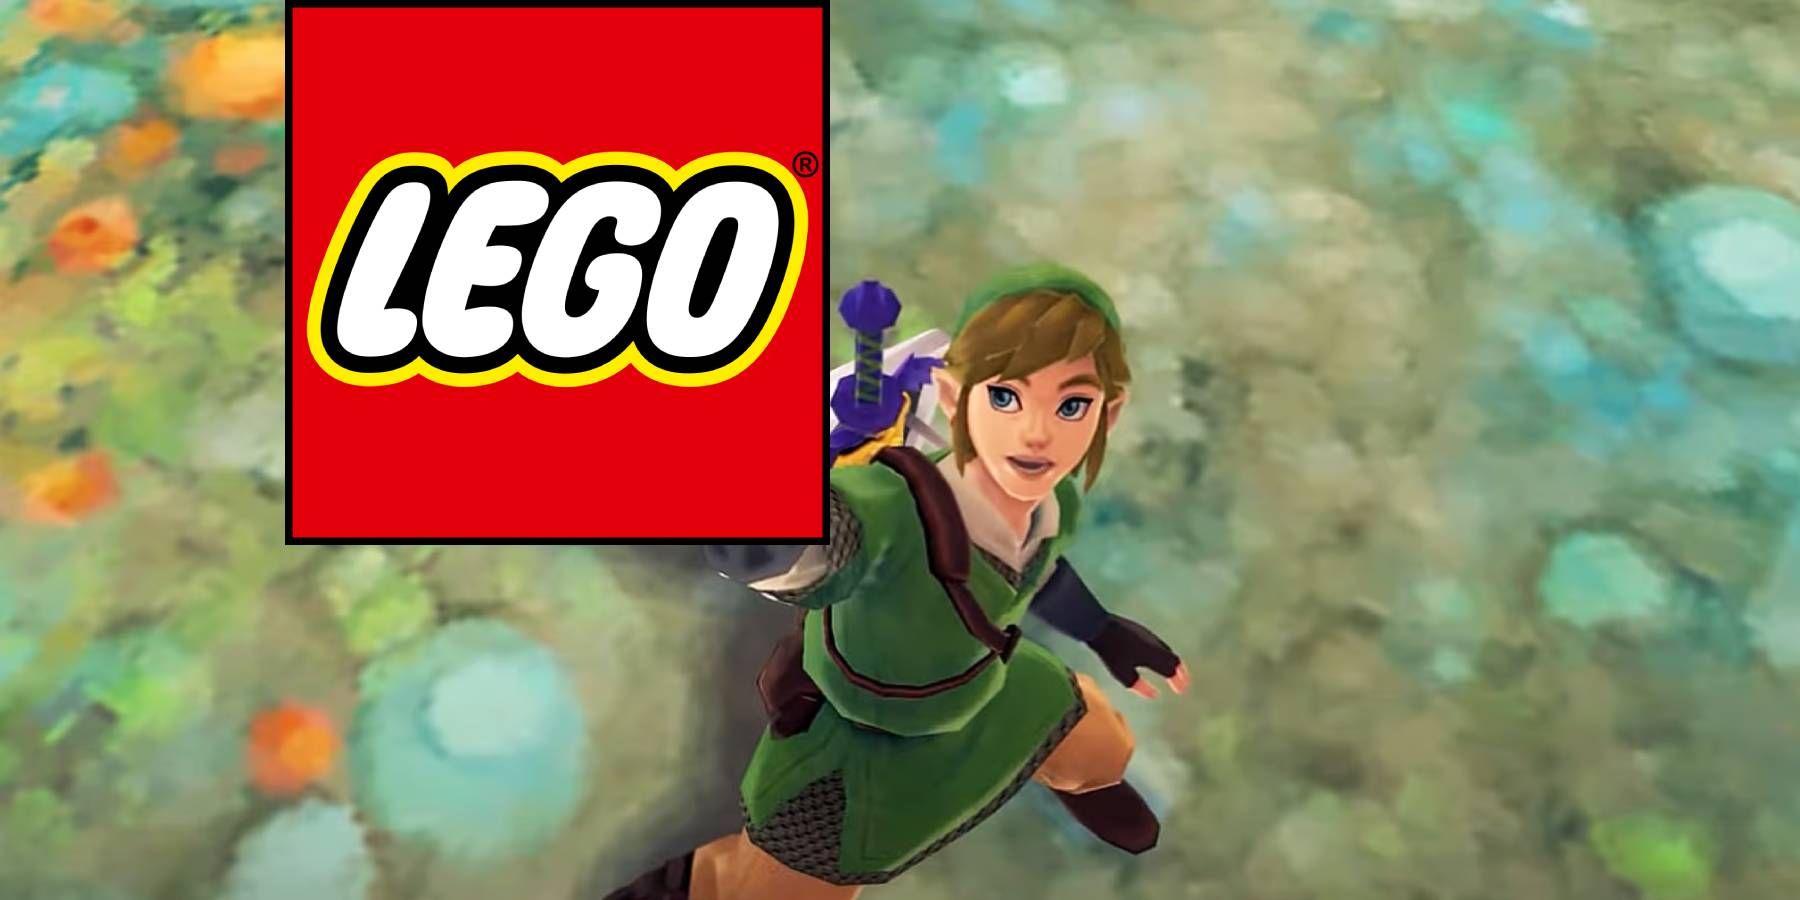 Link from The Legend of Zelda with the LEGO logo